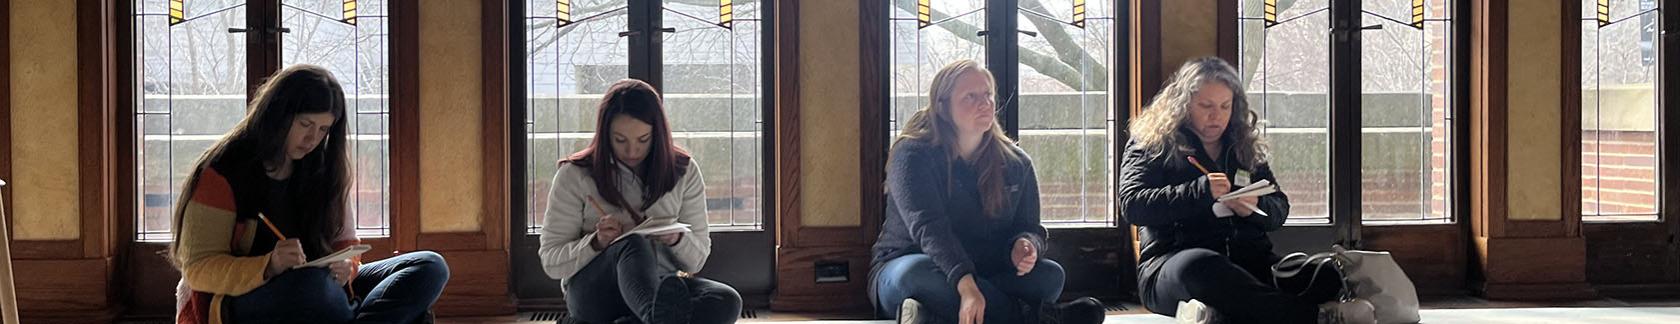 Educators sitting in front of Robie House windows